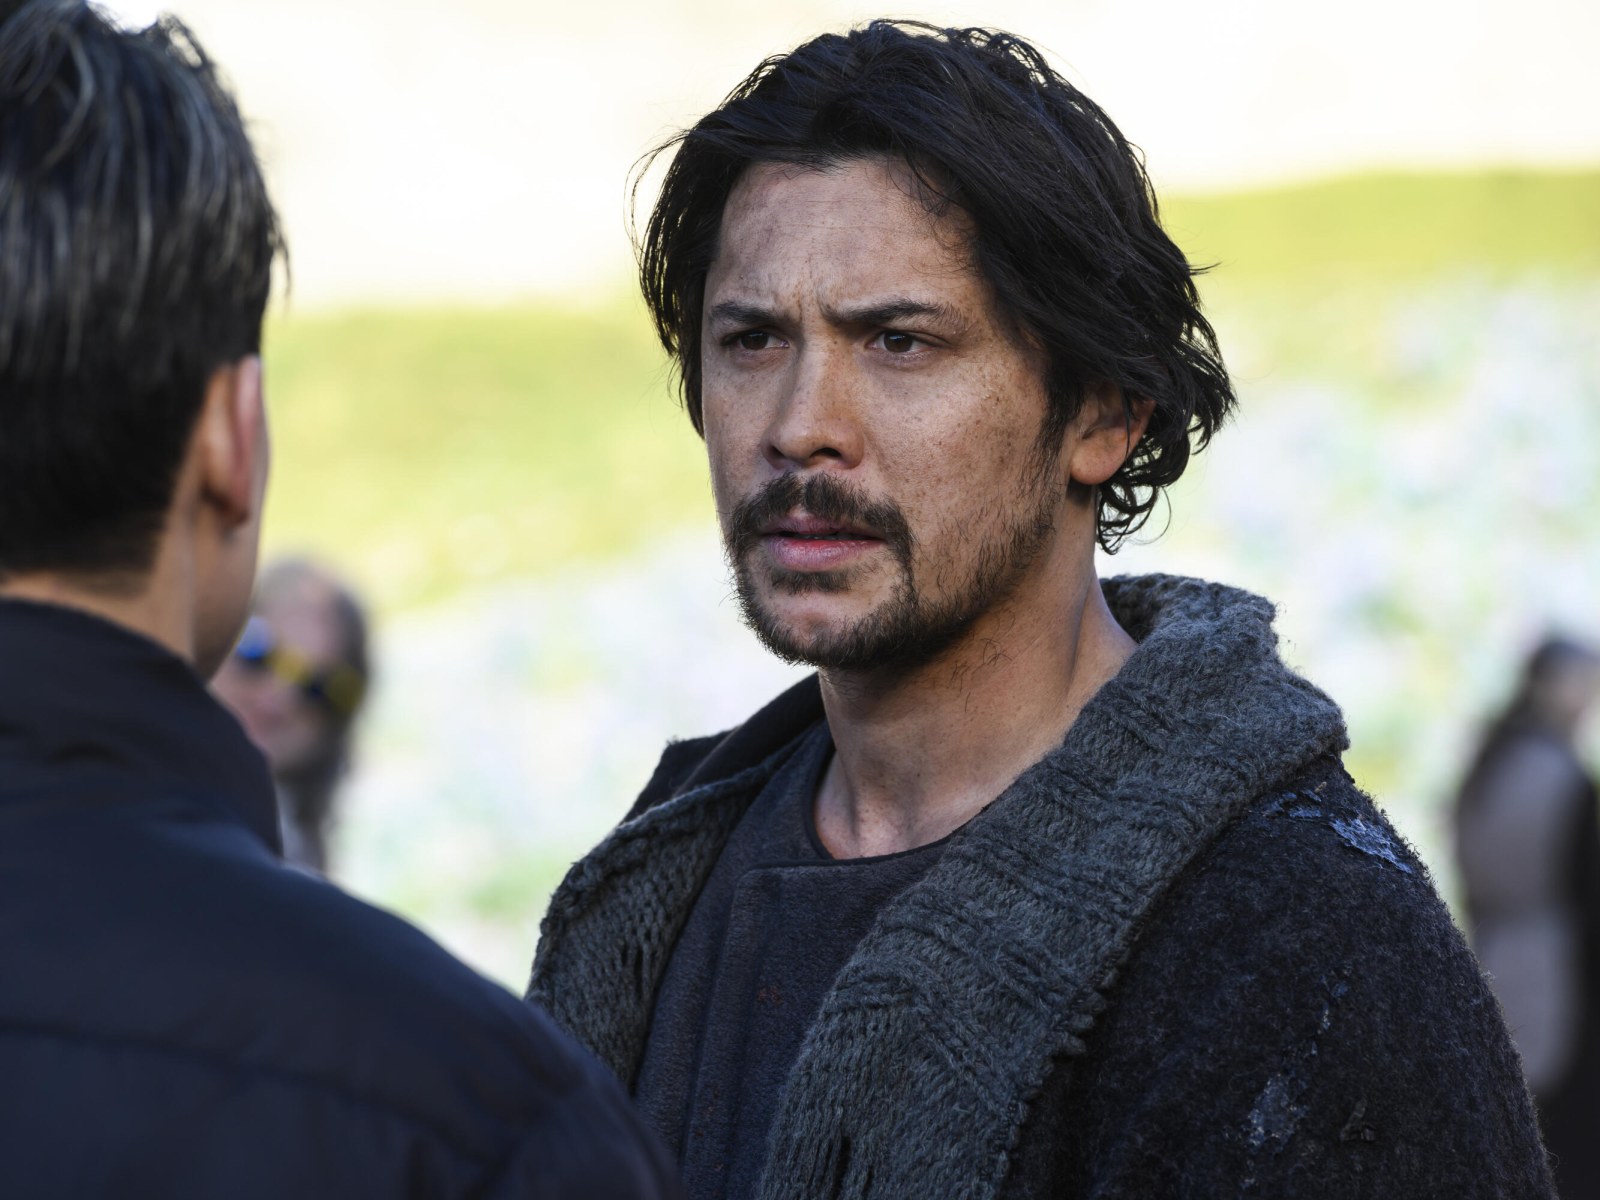 The 100' Show Boss Reveals Why They Killed Bellamy in Latest Episode